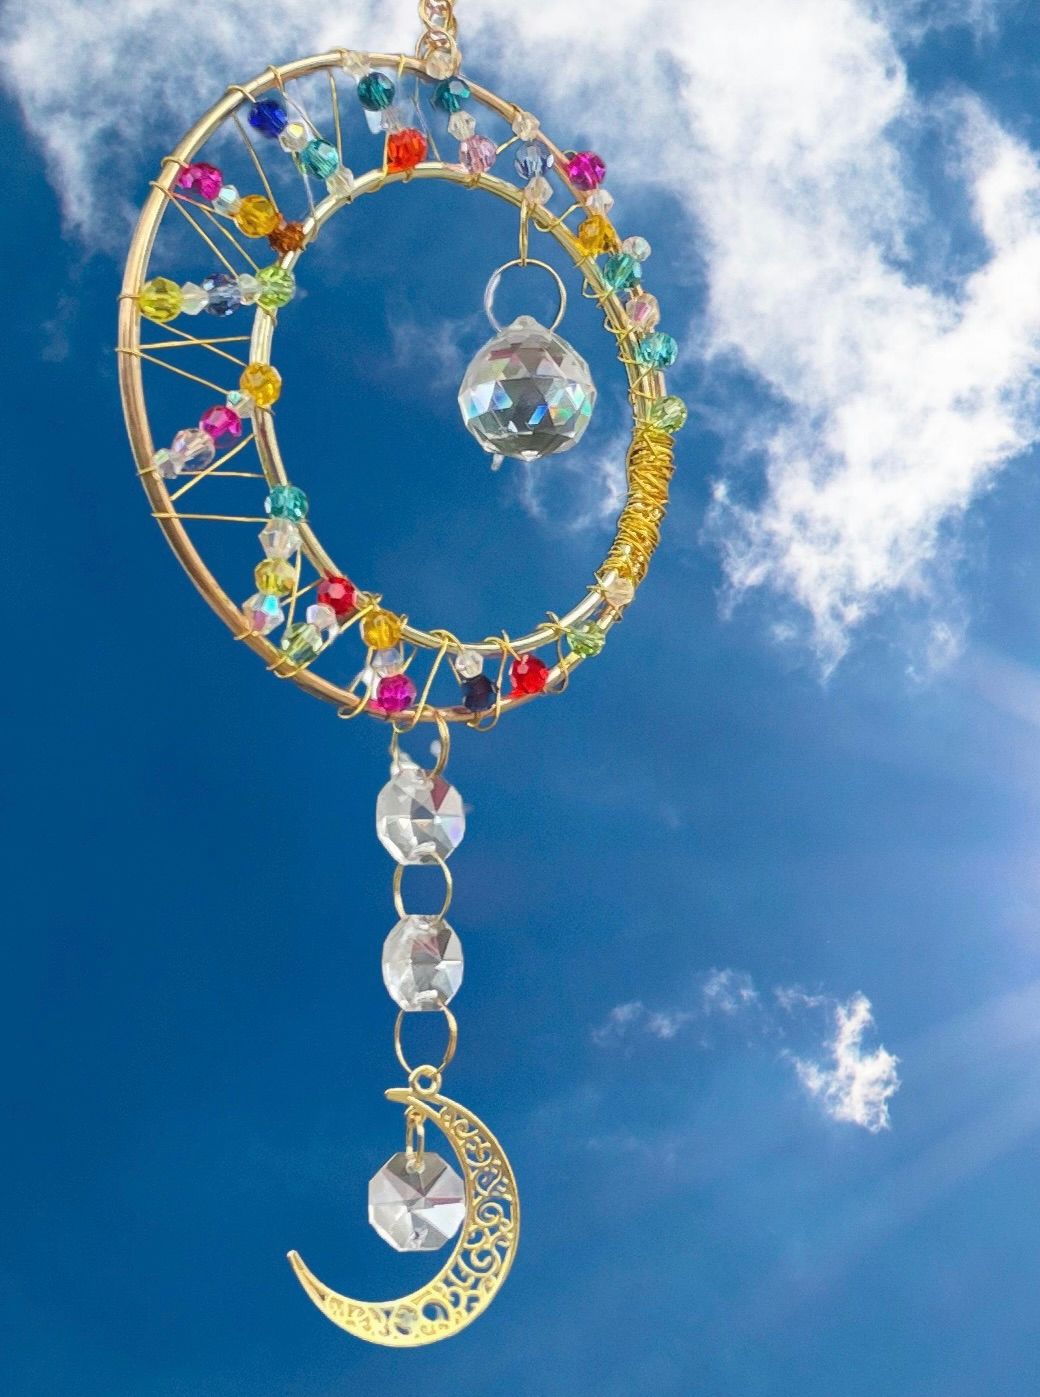 Make your own moon and stars suncatcher